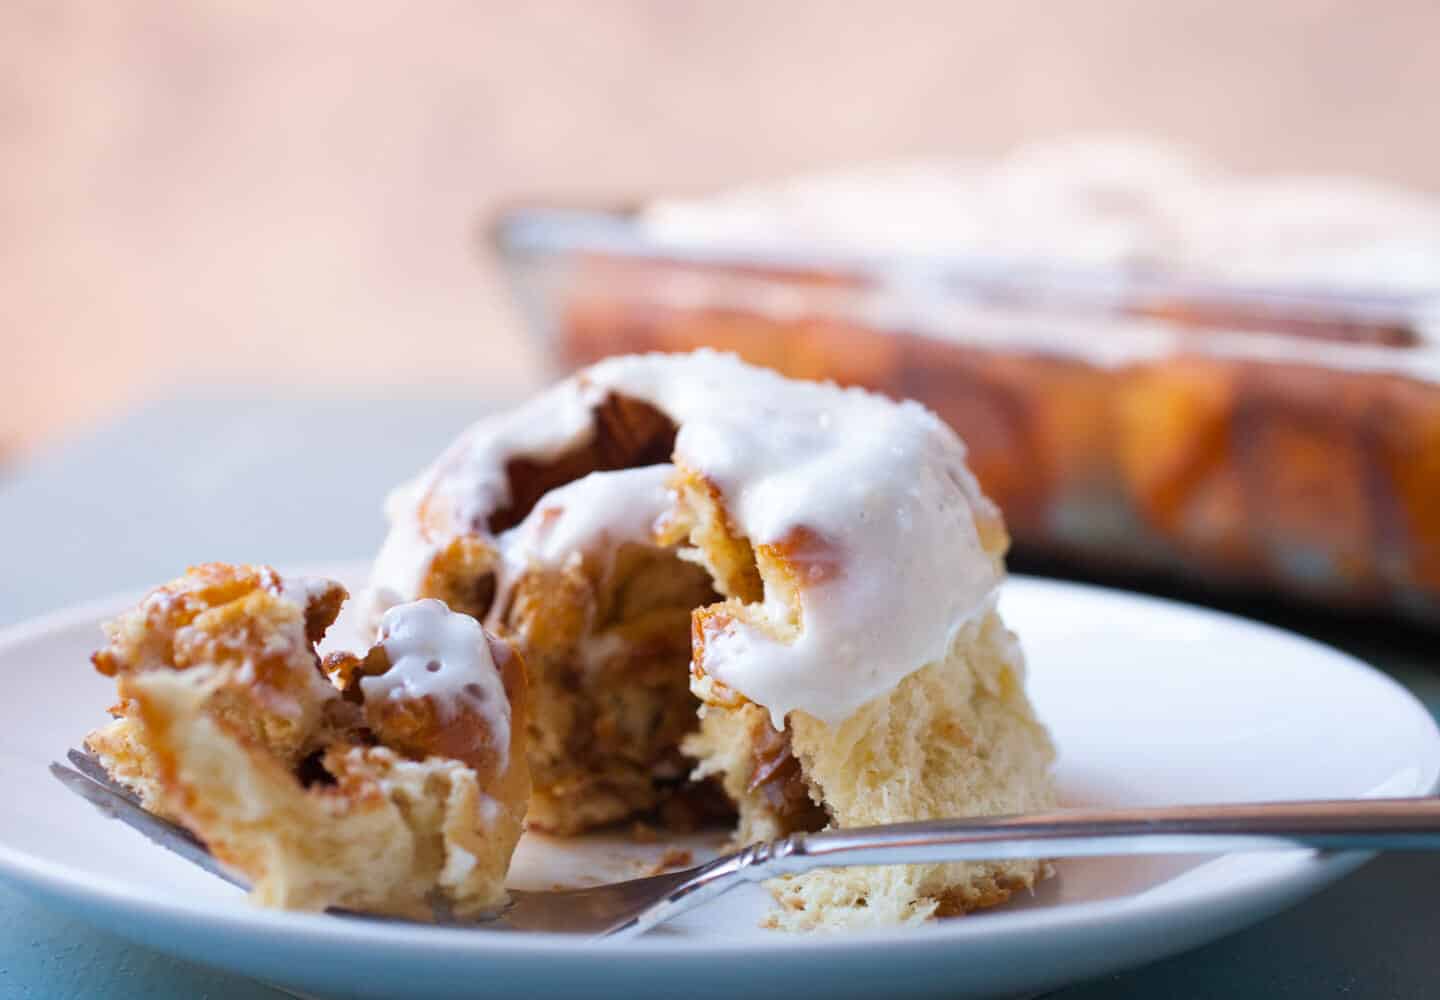 Overnight Cinnamon Rolls: These are one of my favorite slow food breakfasts. Sure, they take time to make, but the results are one of the best cinnamon rolls you'll eat. Enjoy. | macheesmo.com